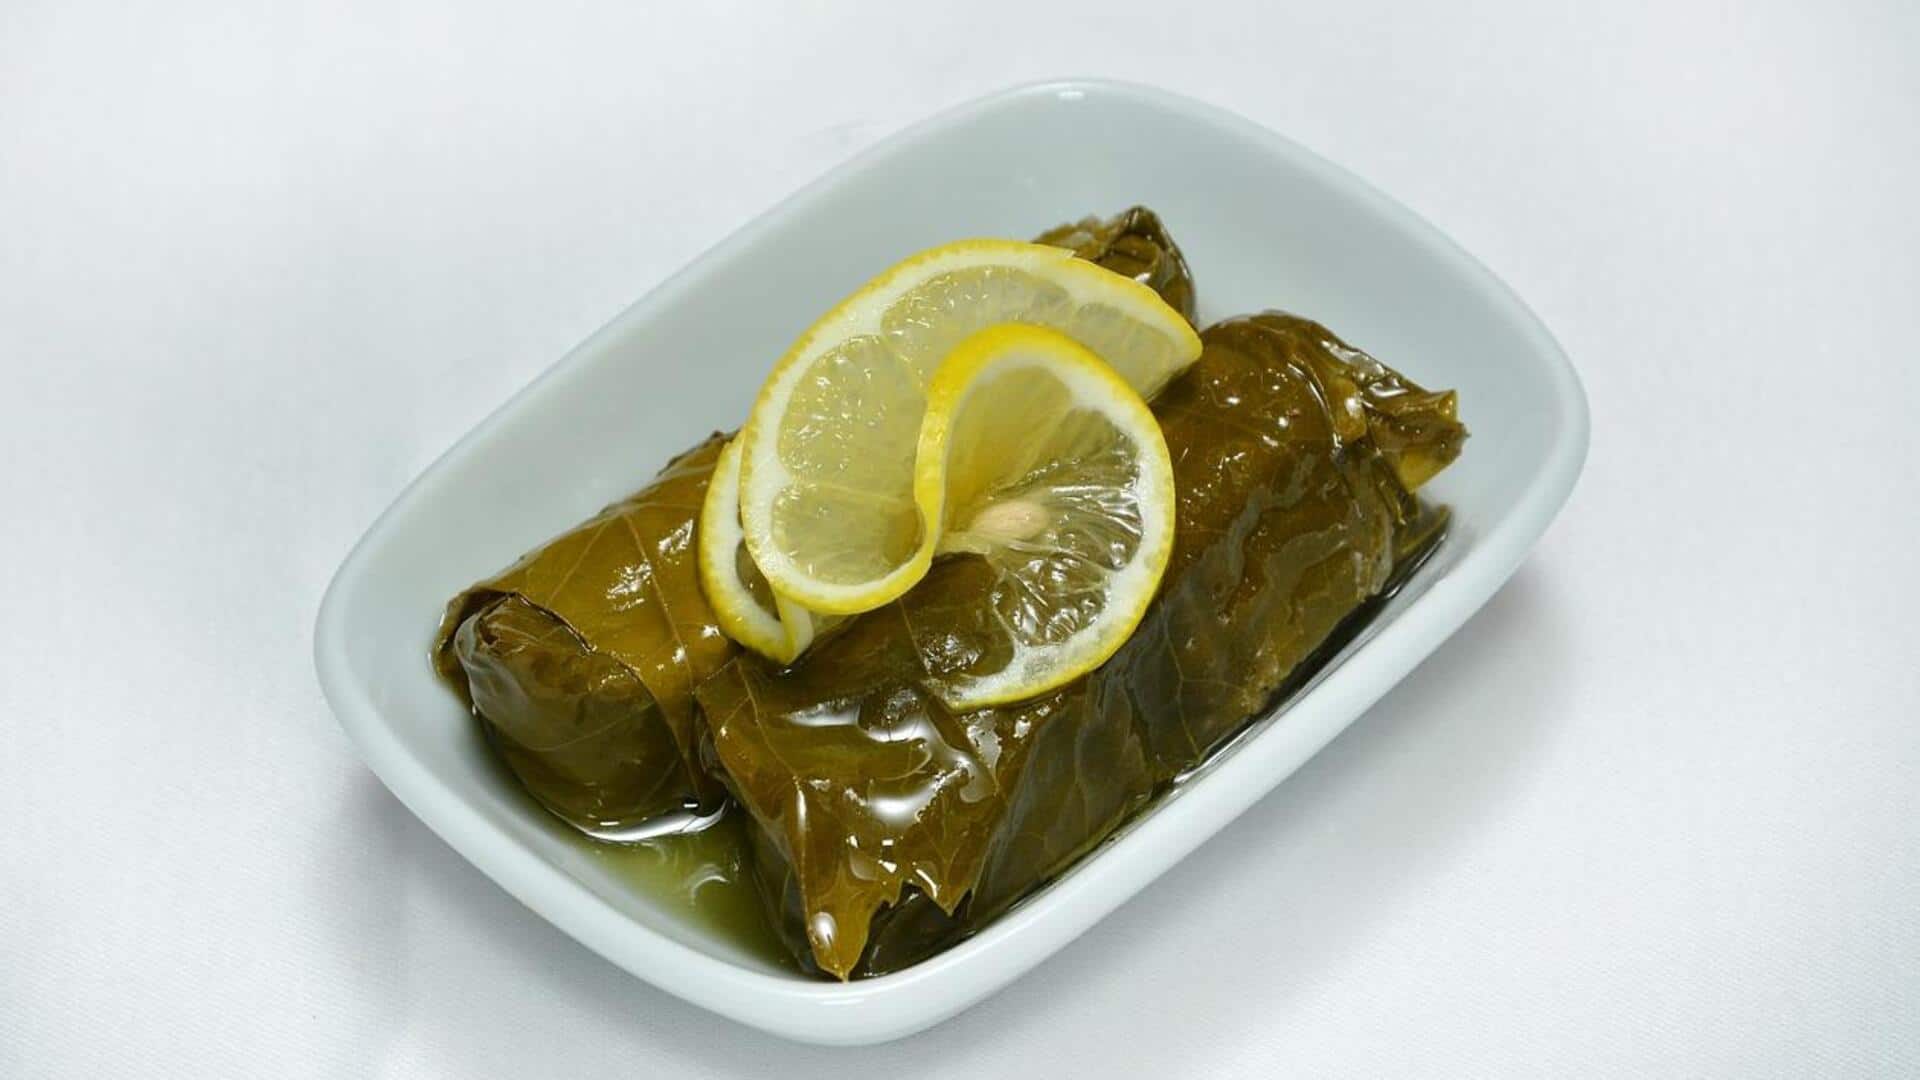 Check out this easy Mediterranean stuffed grape leaves recipe